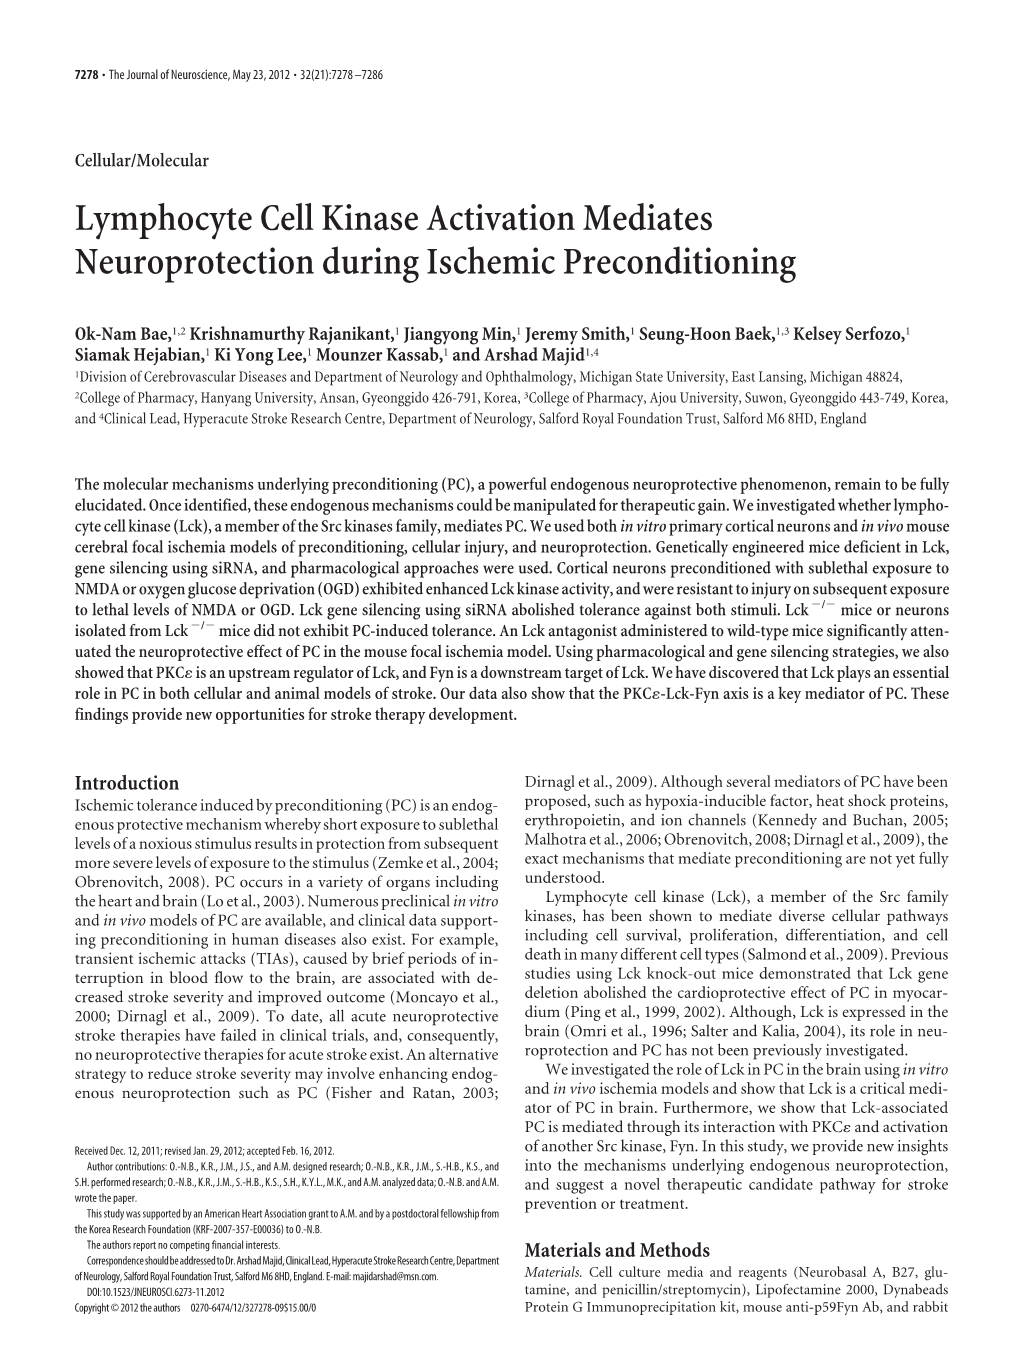 Lymphocyte Cell Kinase Activation Mediates Neuroprotection During Ischemic Preconditioning